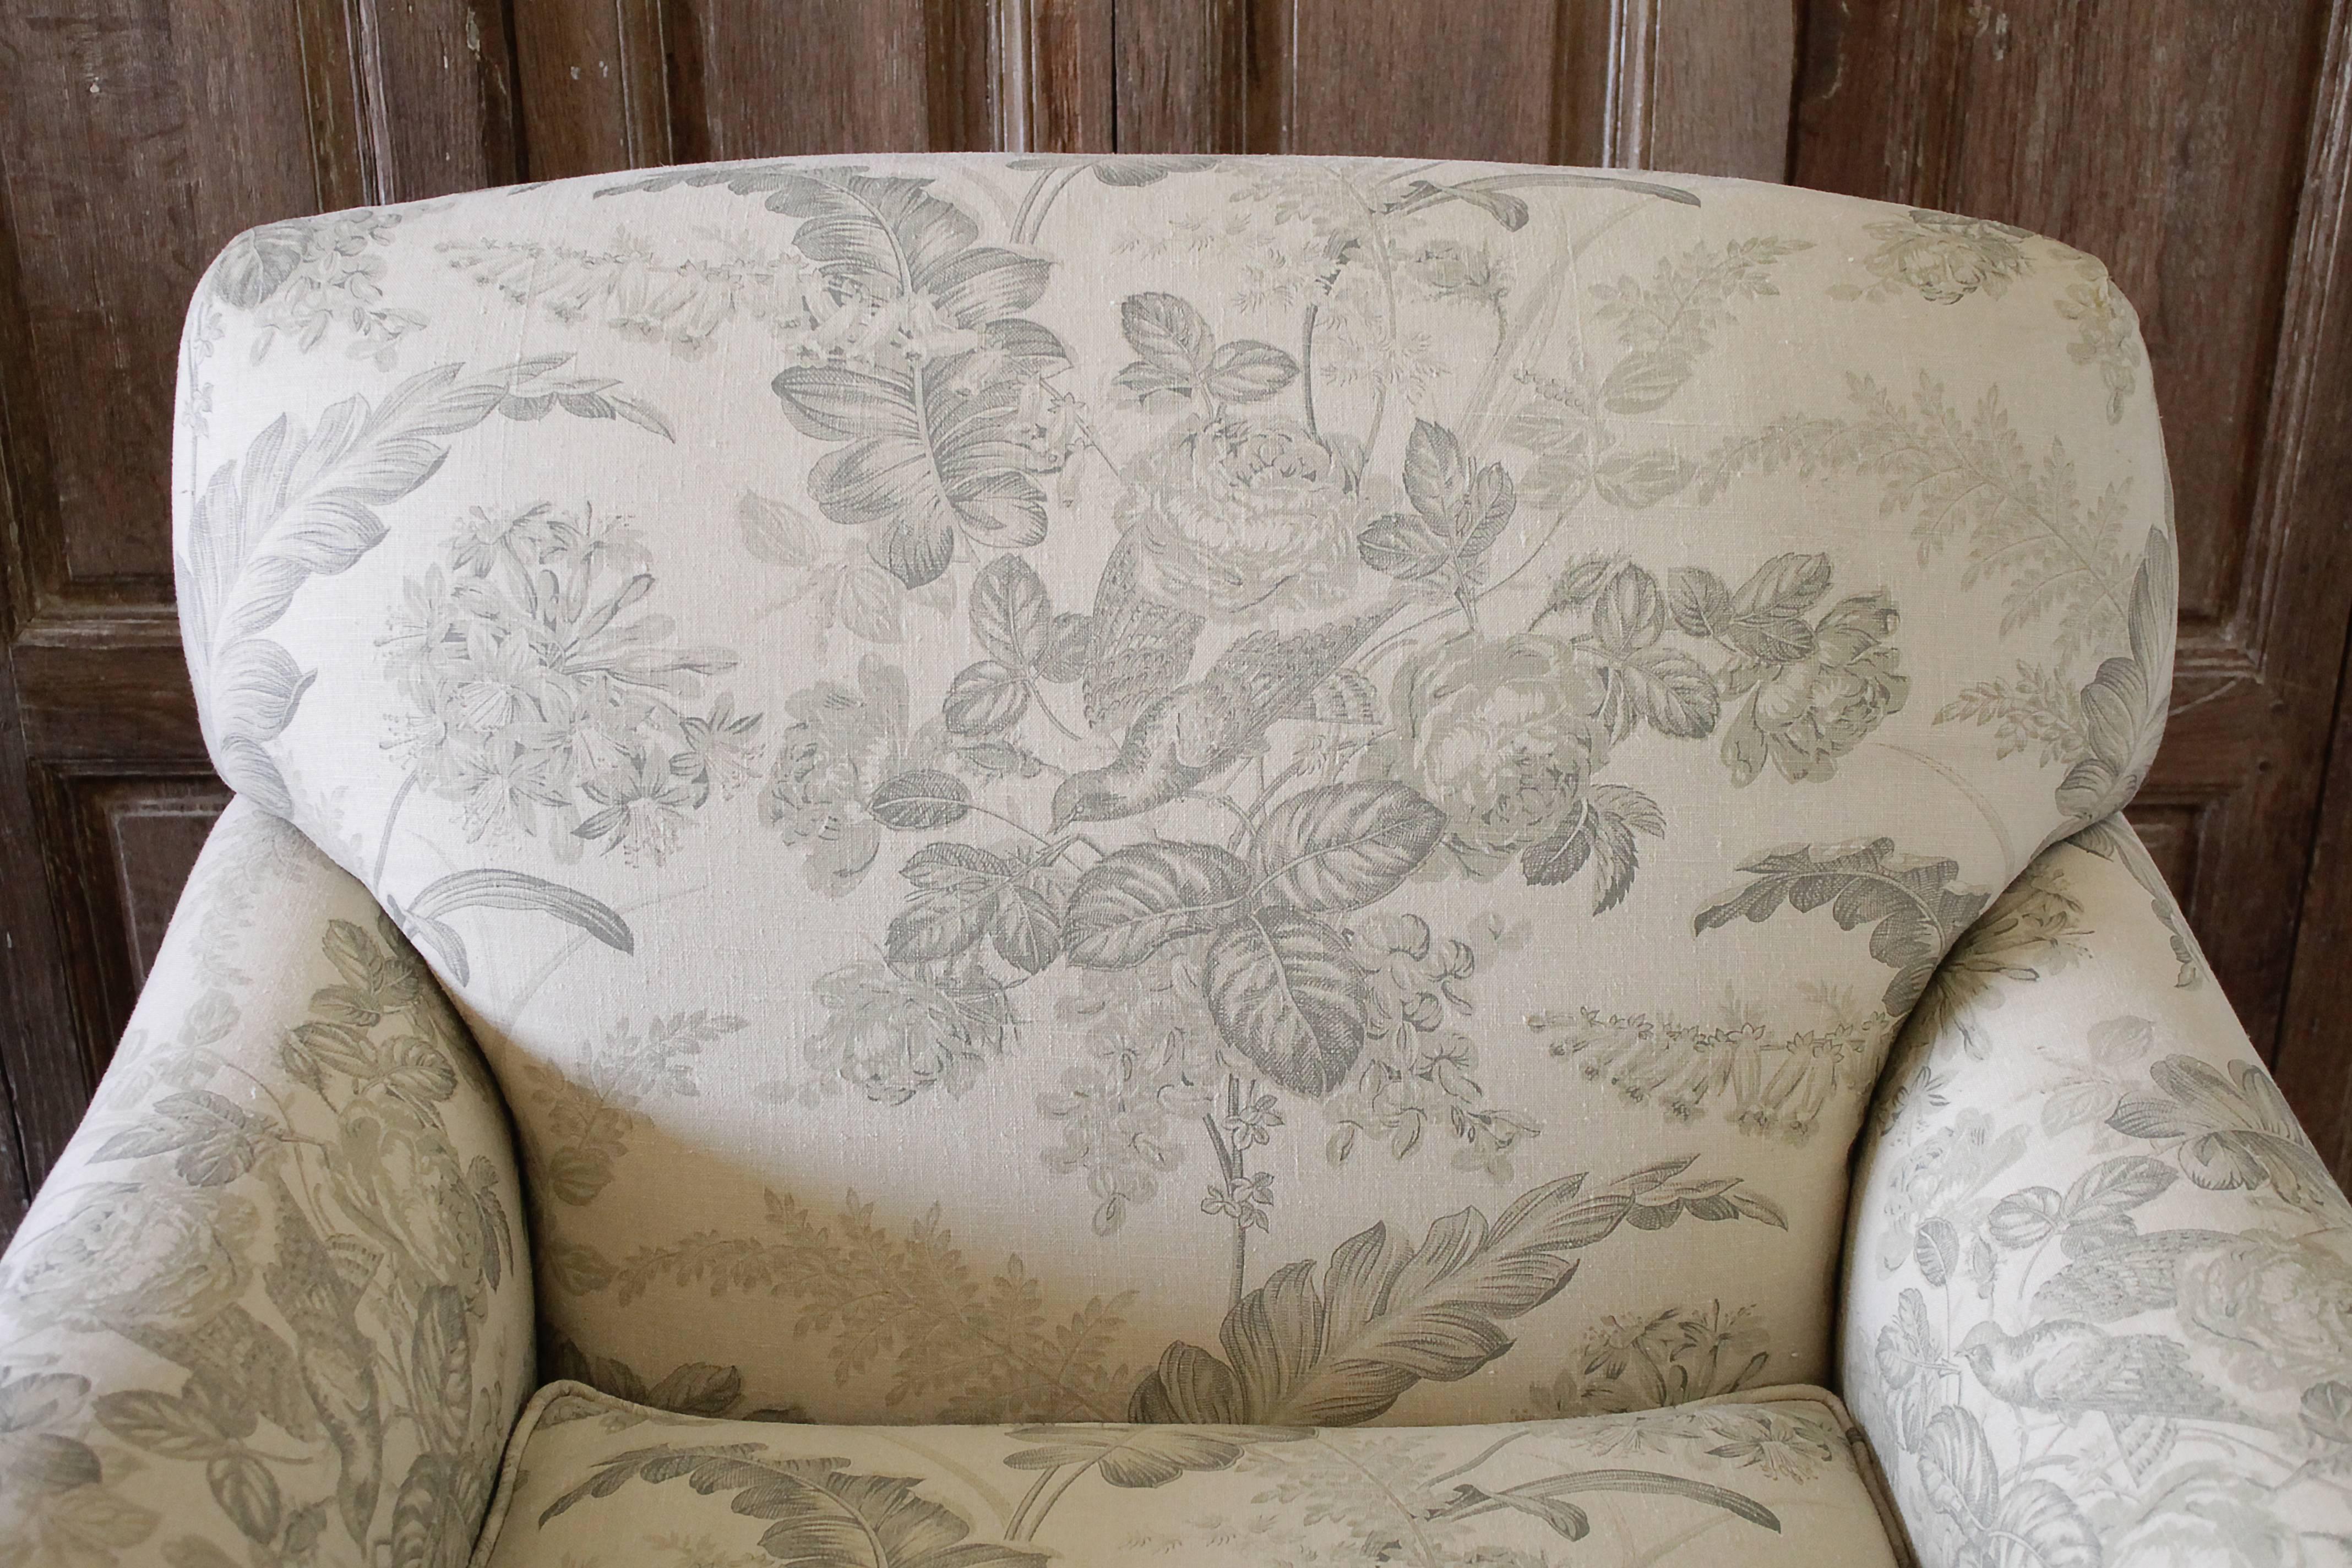 Pair of Modern Swivel Chairs in French Toile Linen Upholstery 
These custom made swivel chairs are very clean, new looking. Upholstered in a beautiful linen, off white creamy background color with dark sage color toile print with birds.
Seats are